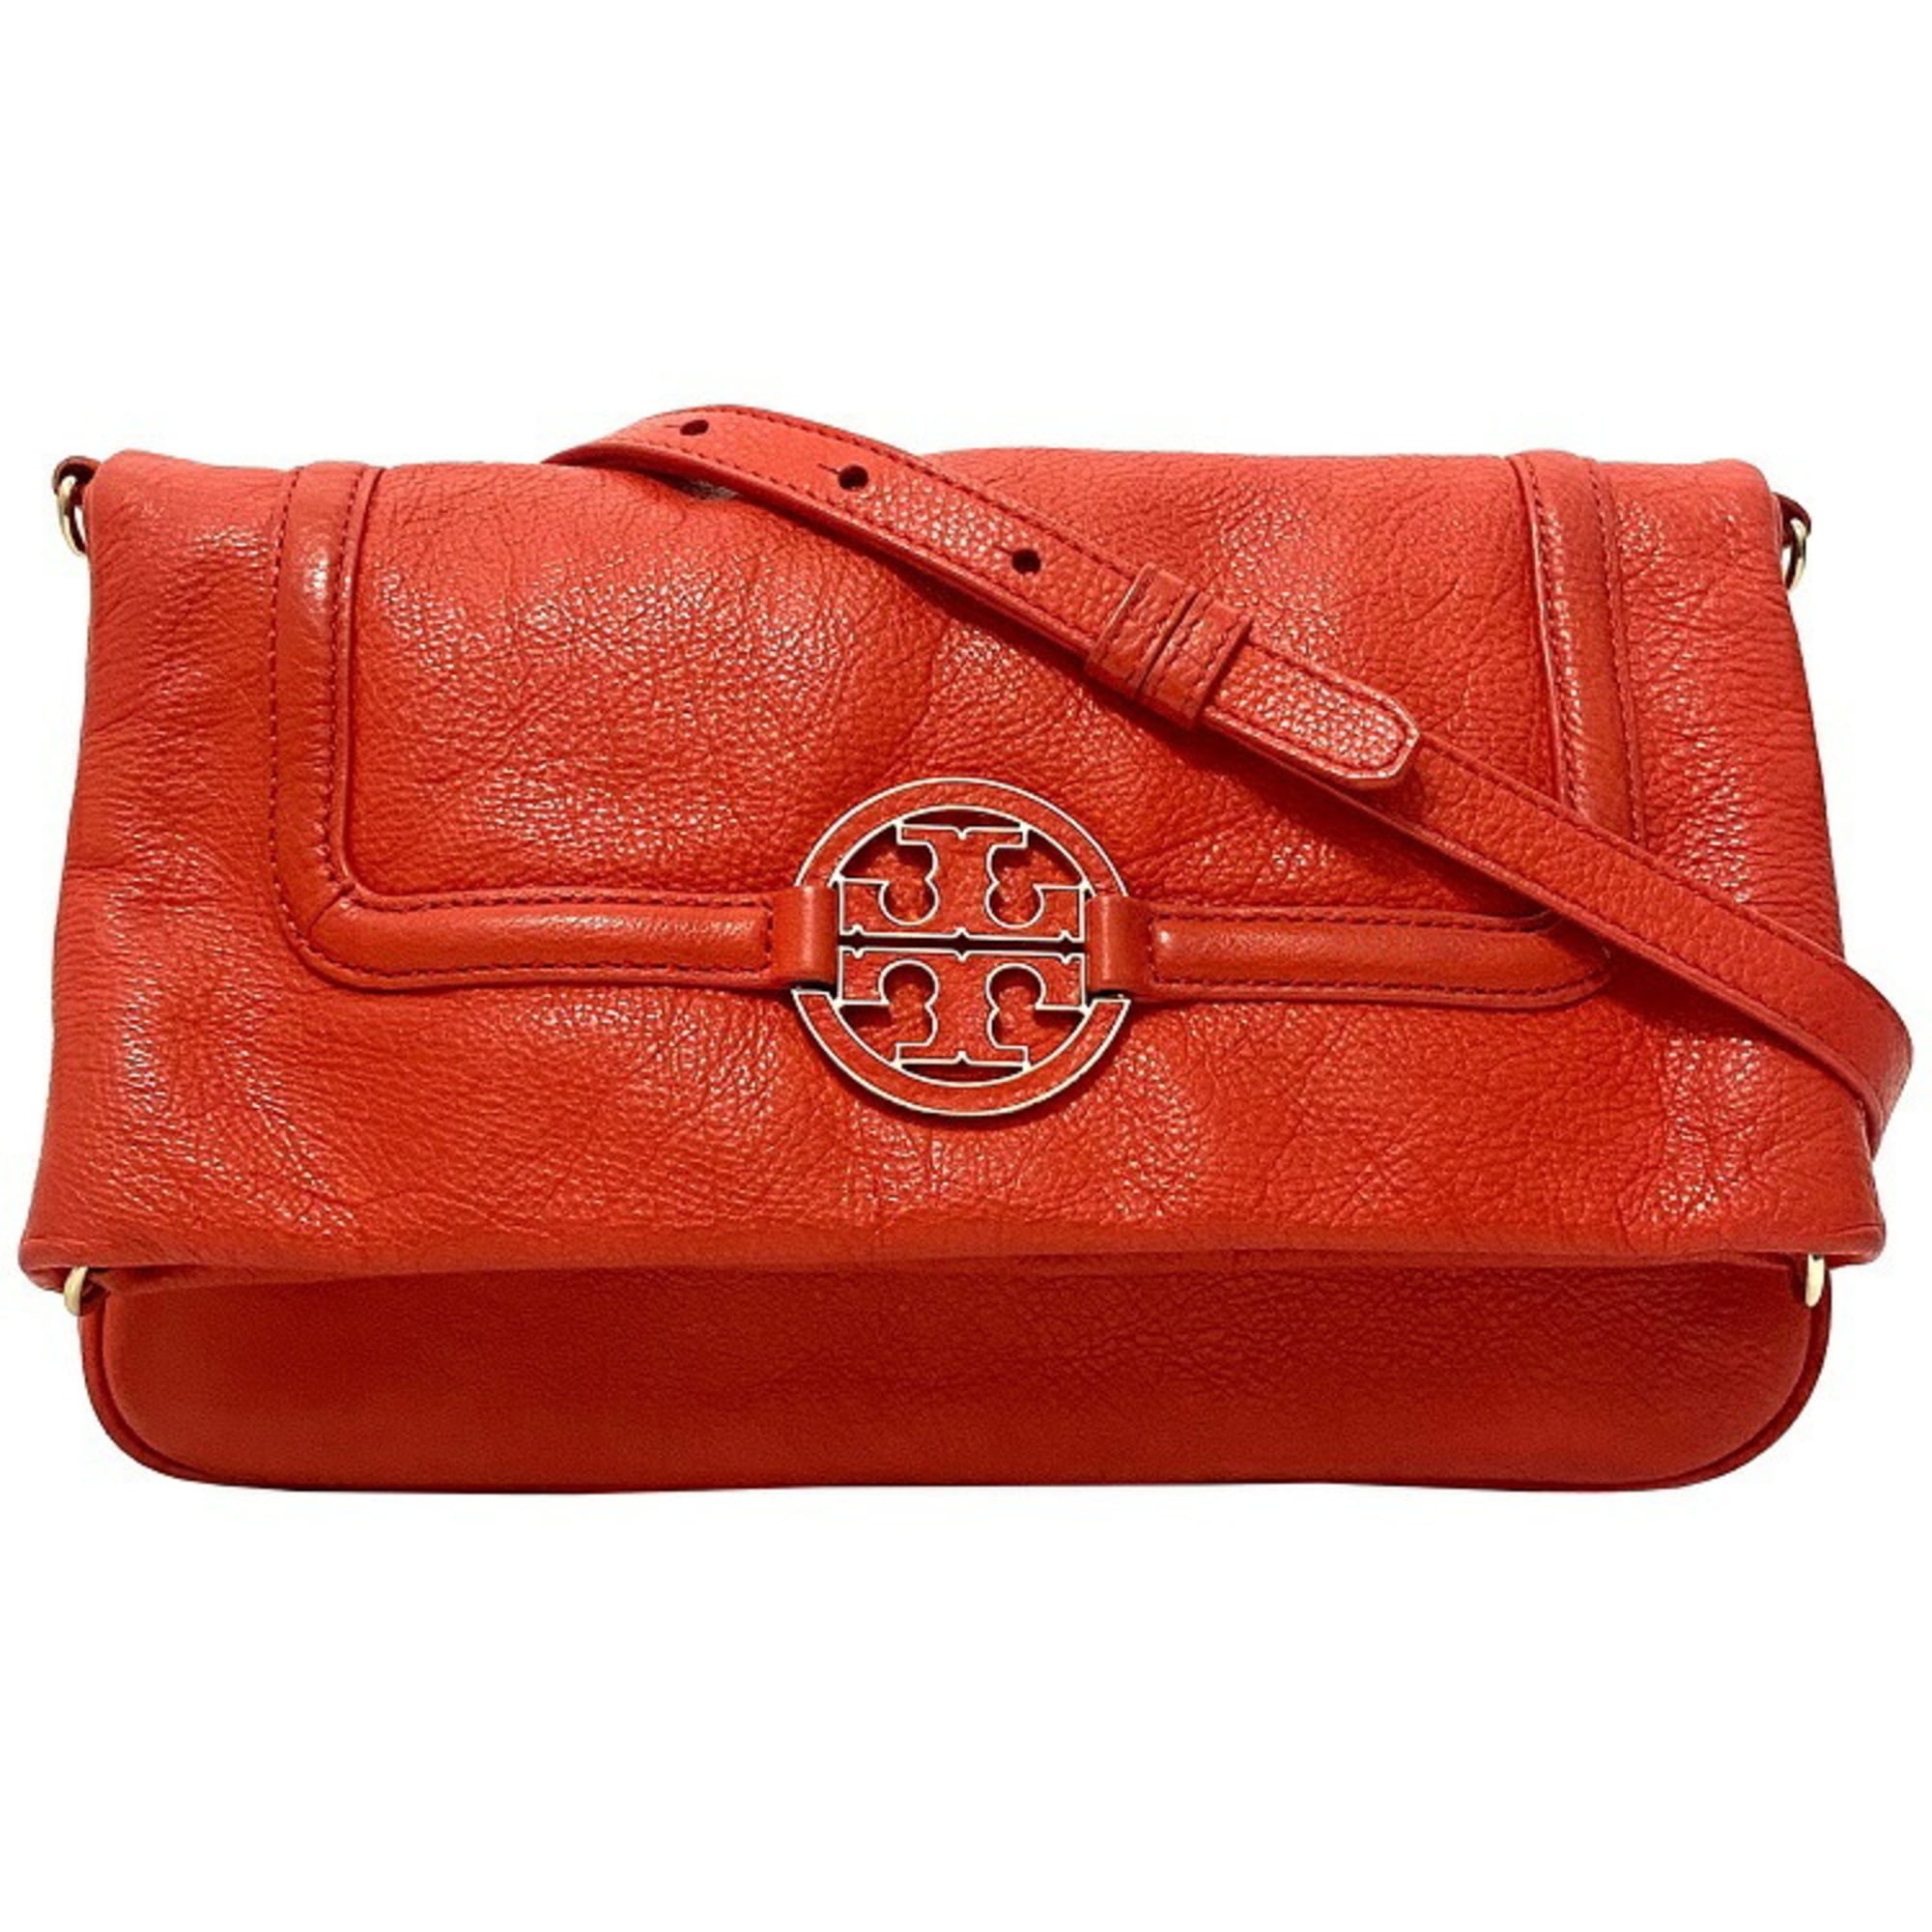 Authenticated Used Tory Burch Shoulder Bag Red Gold Amanda Clutch Leather TORY  BURCH 2way Flap Women's 